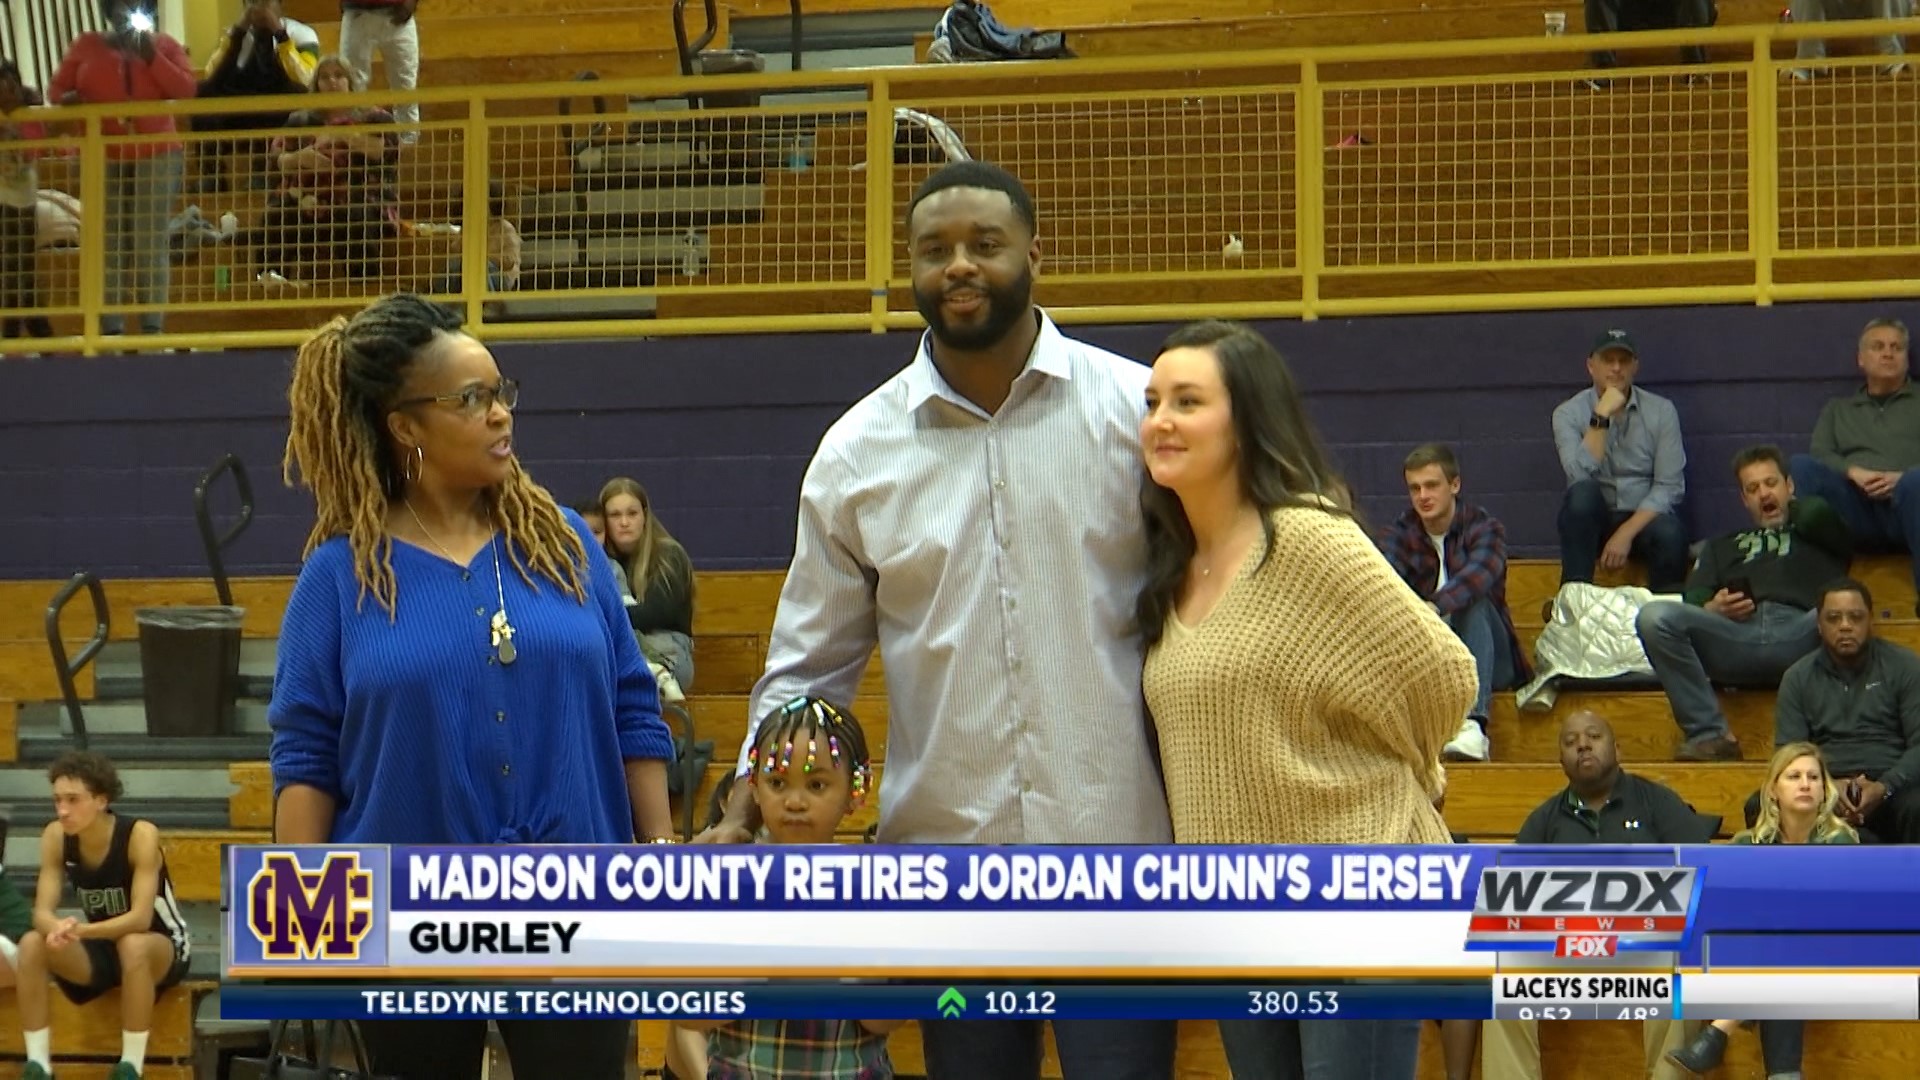 Madison County High School retired the jersey of former Tiger football player Jordan Chunn. No one will ever wear the number 38 jersey ever again.